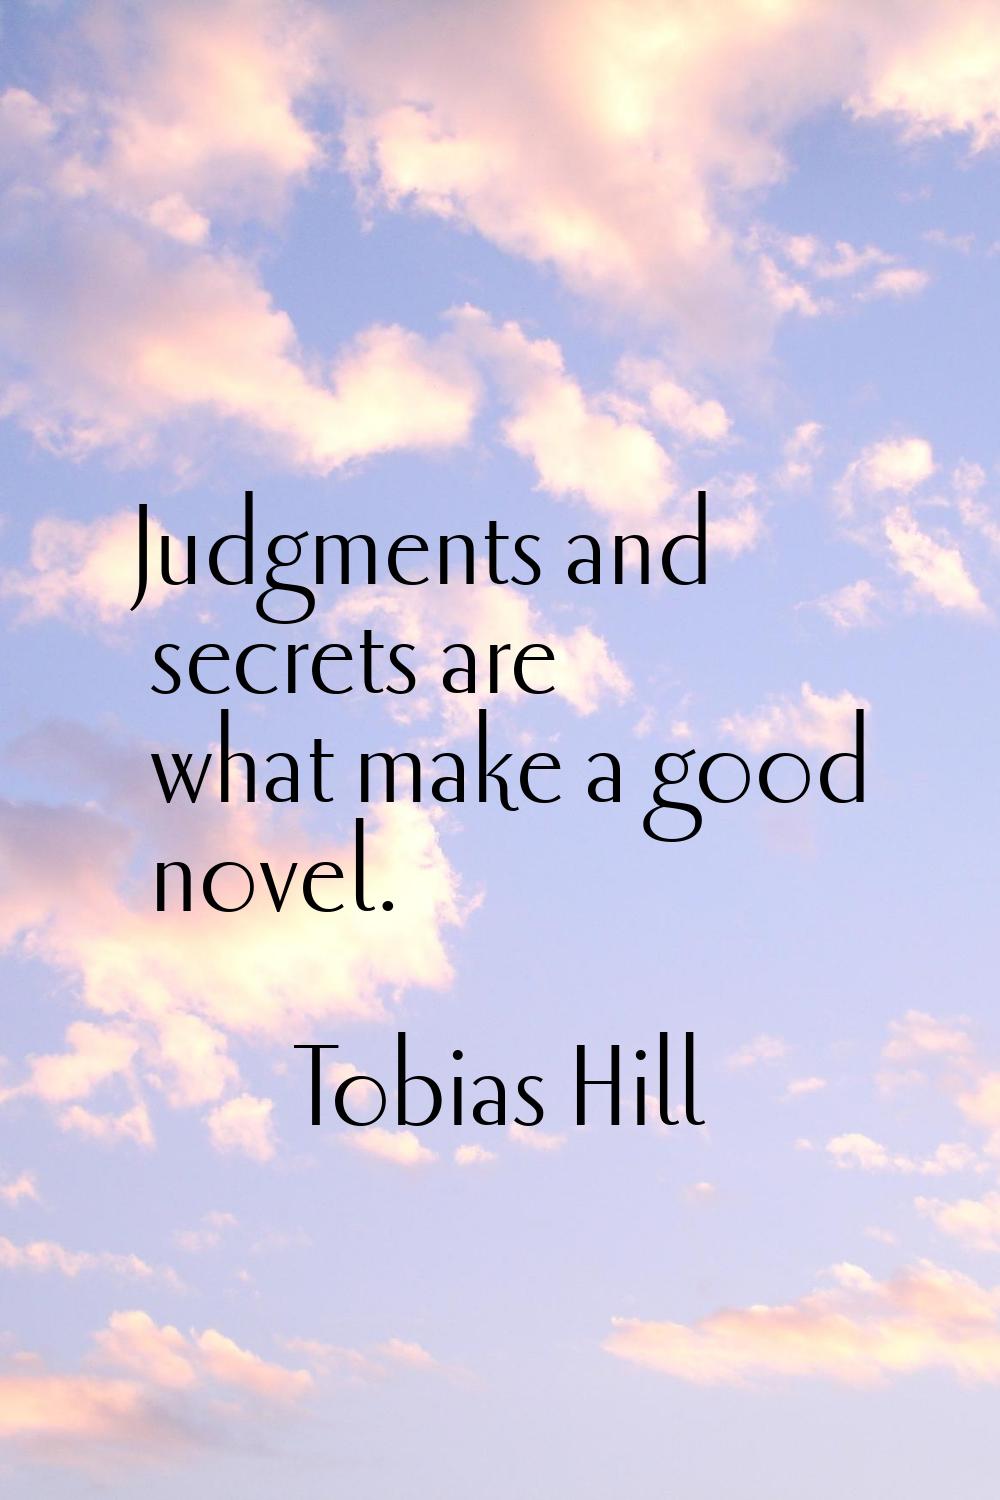 Judgments and secrets are what make a good novel.